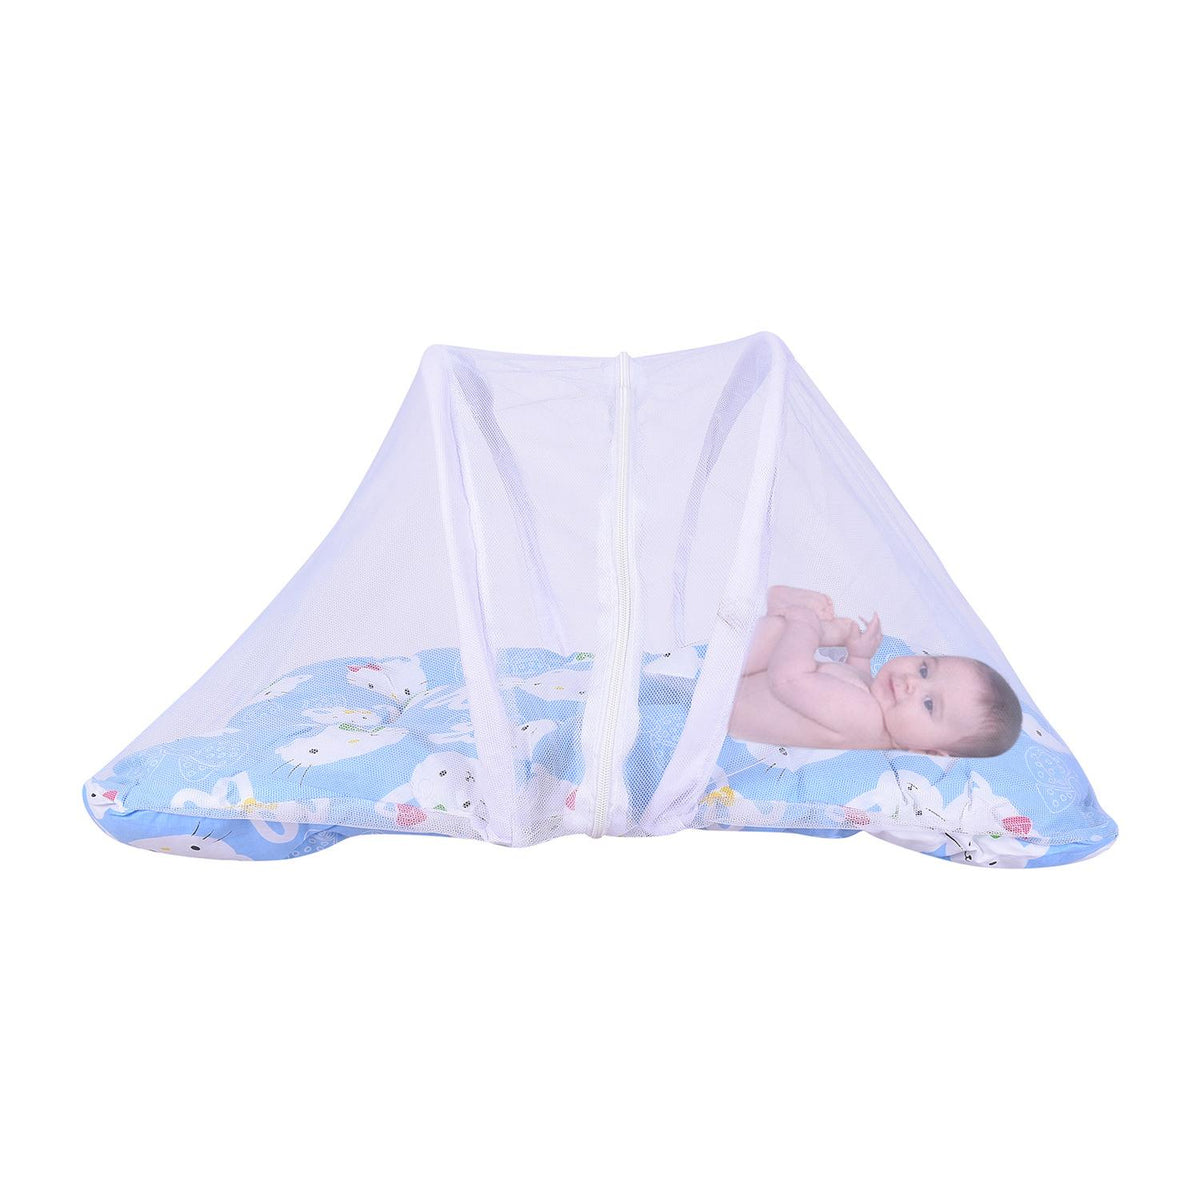 Baby Cotton Mosquito Foldable Net Bedding - Light Blue